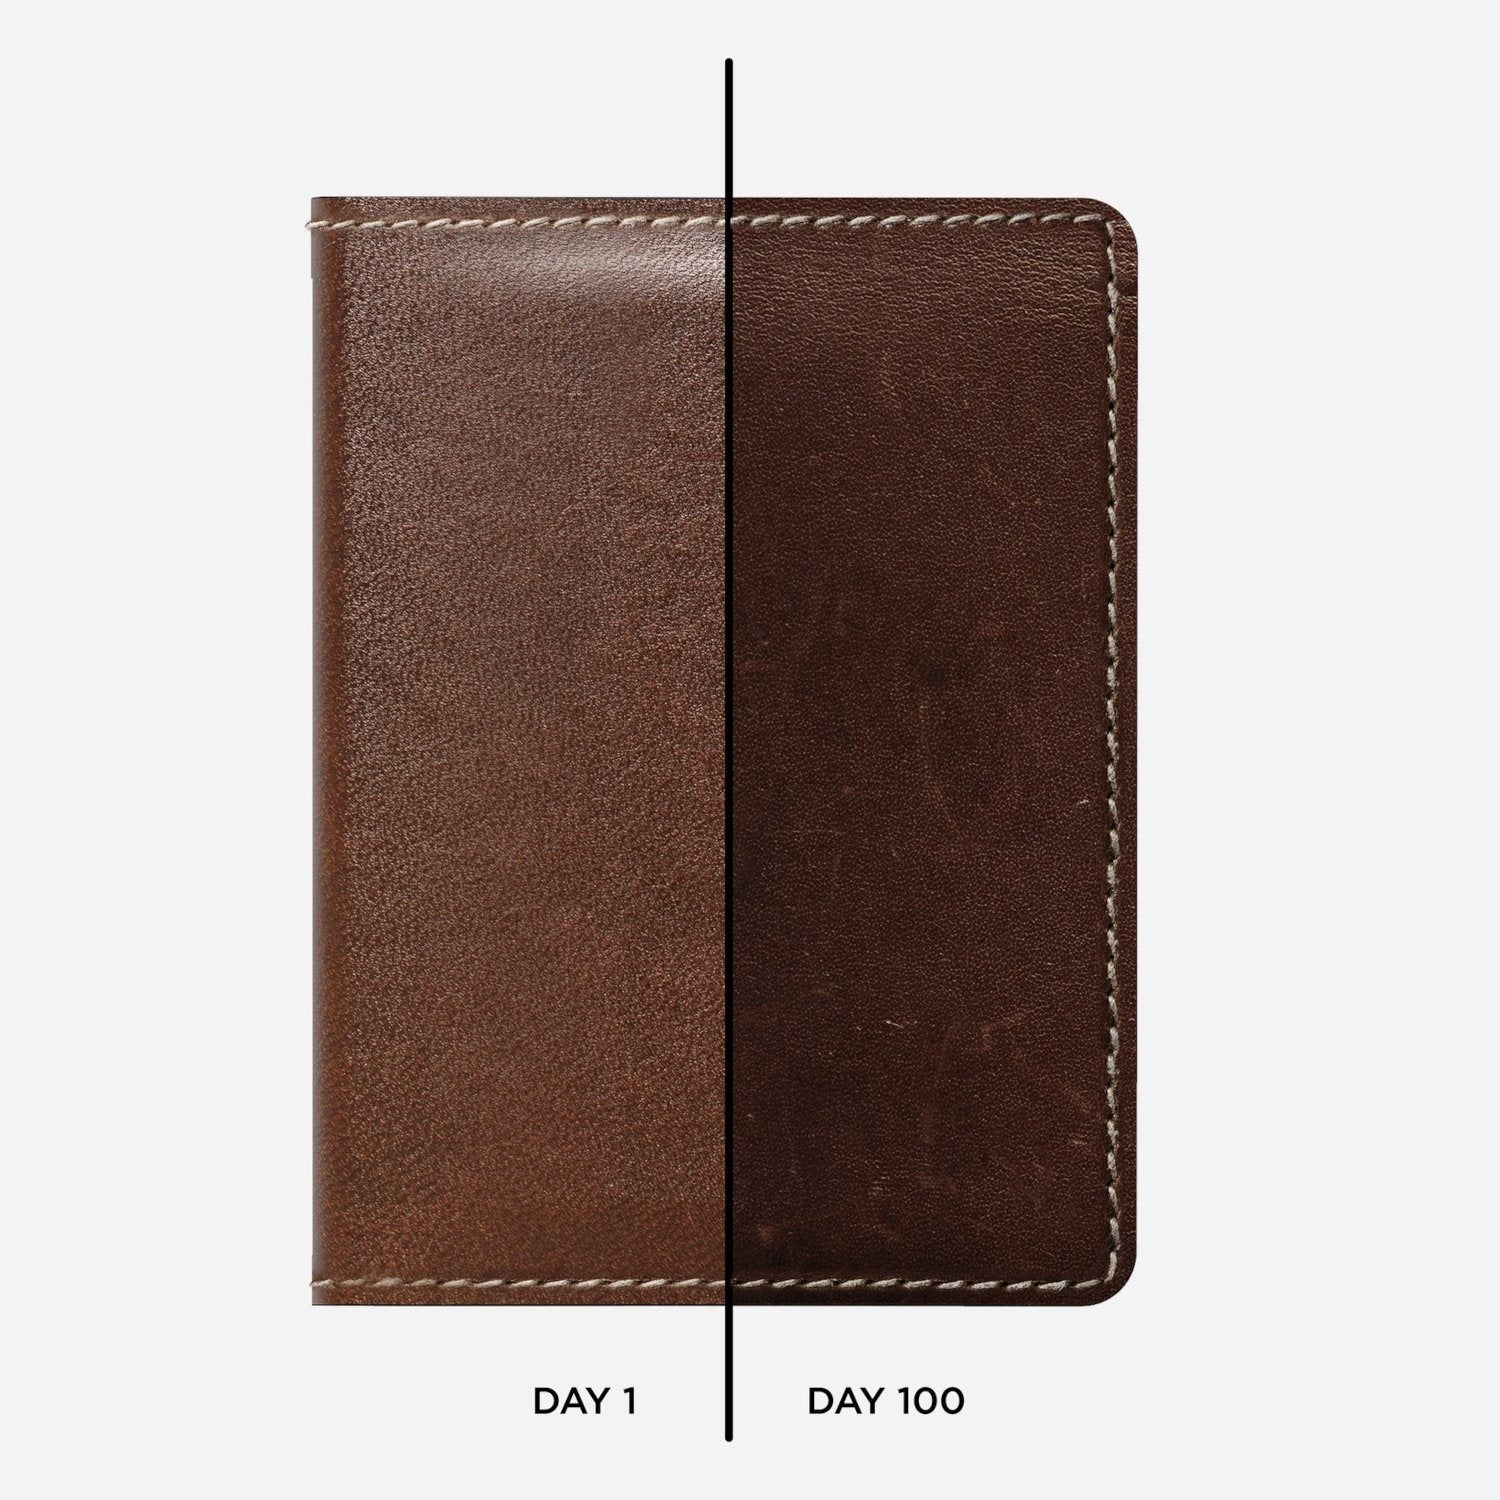 NOMAD Passport Wallet Traditional Edition with Tile Tracking, Brown Wallet NOMAD 